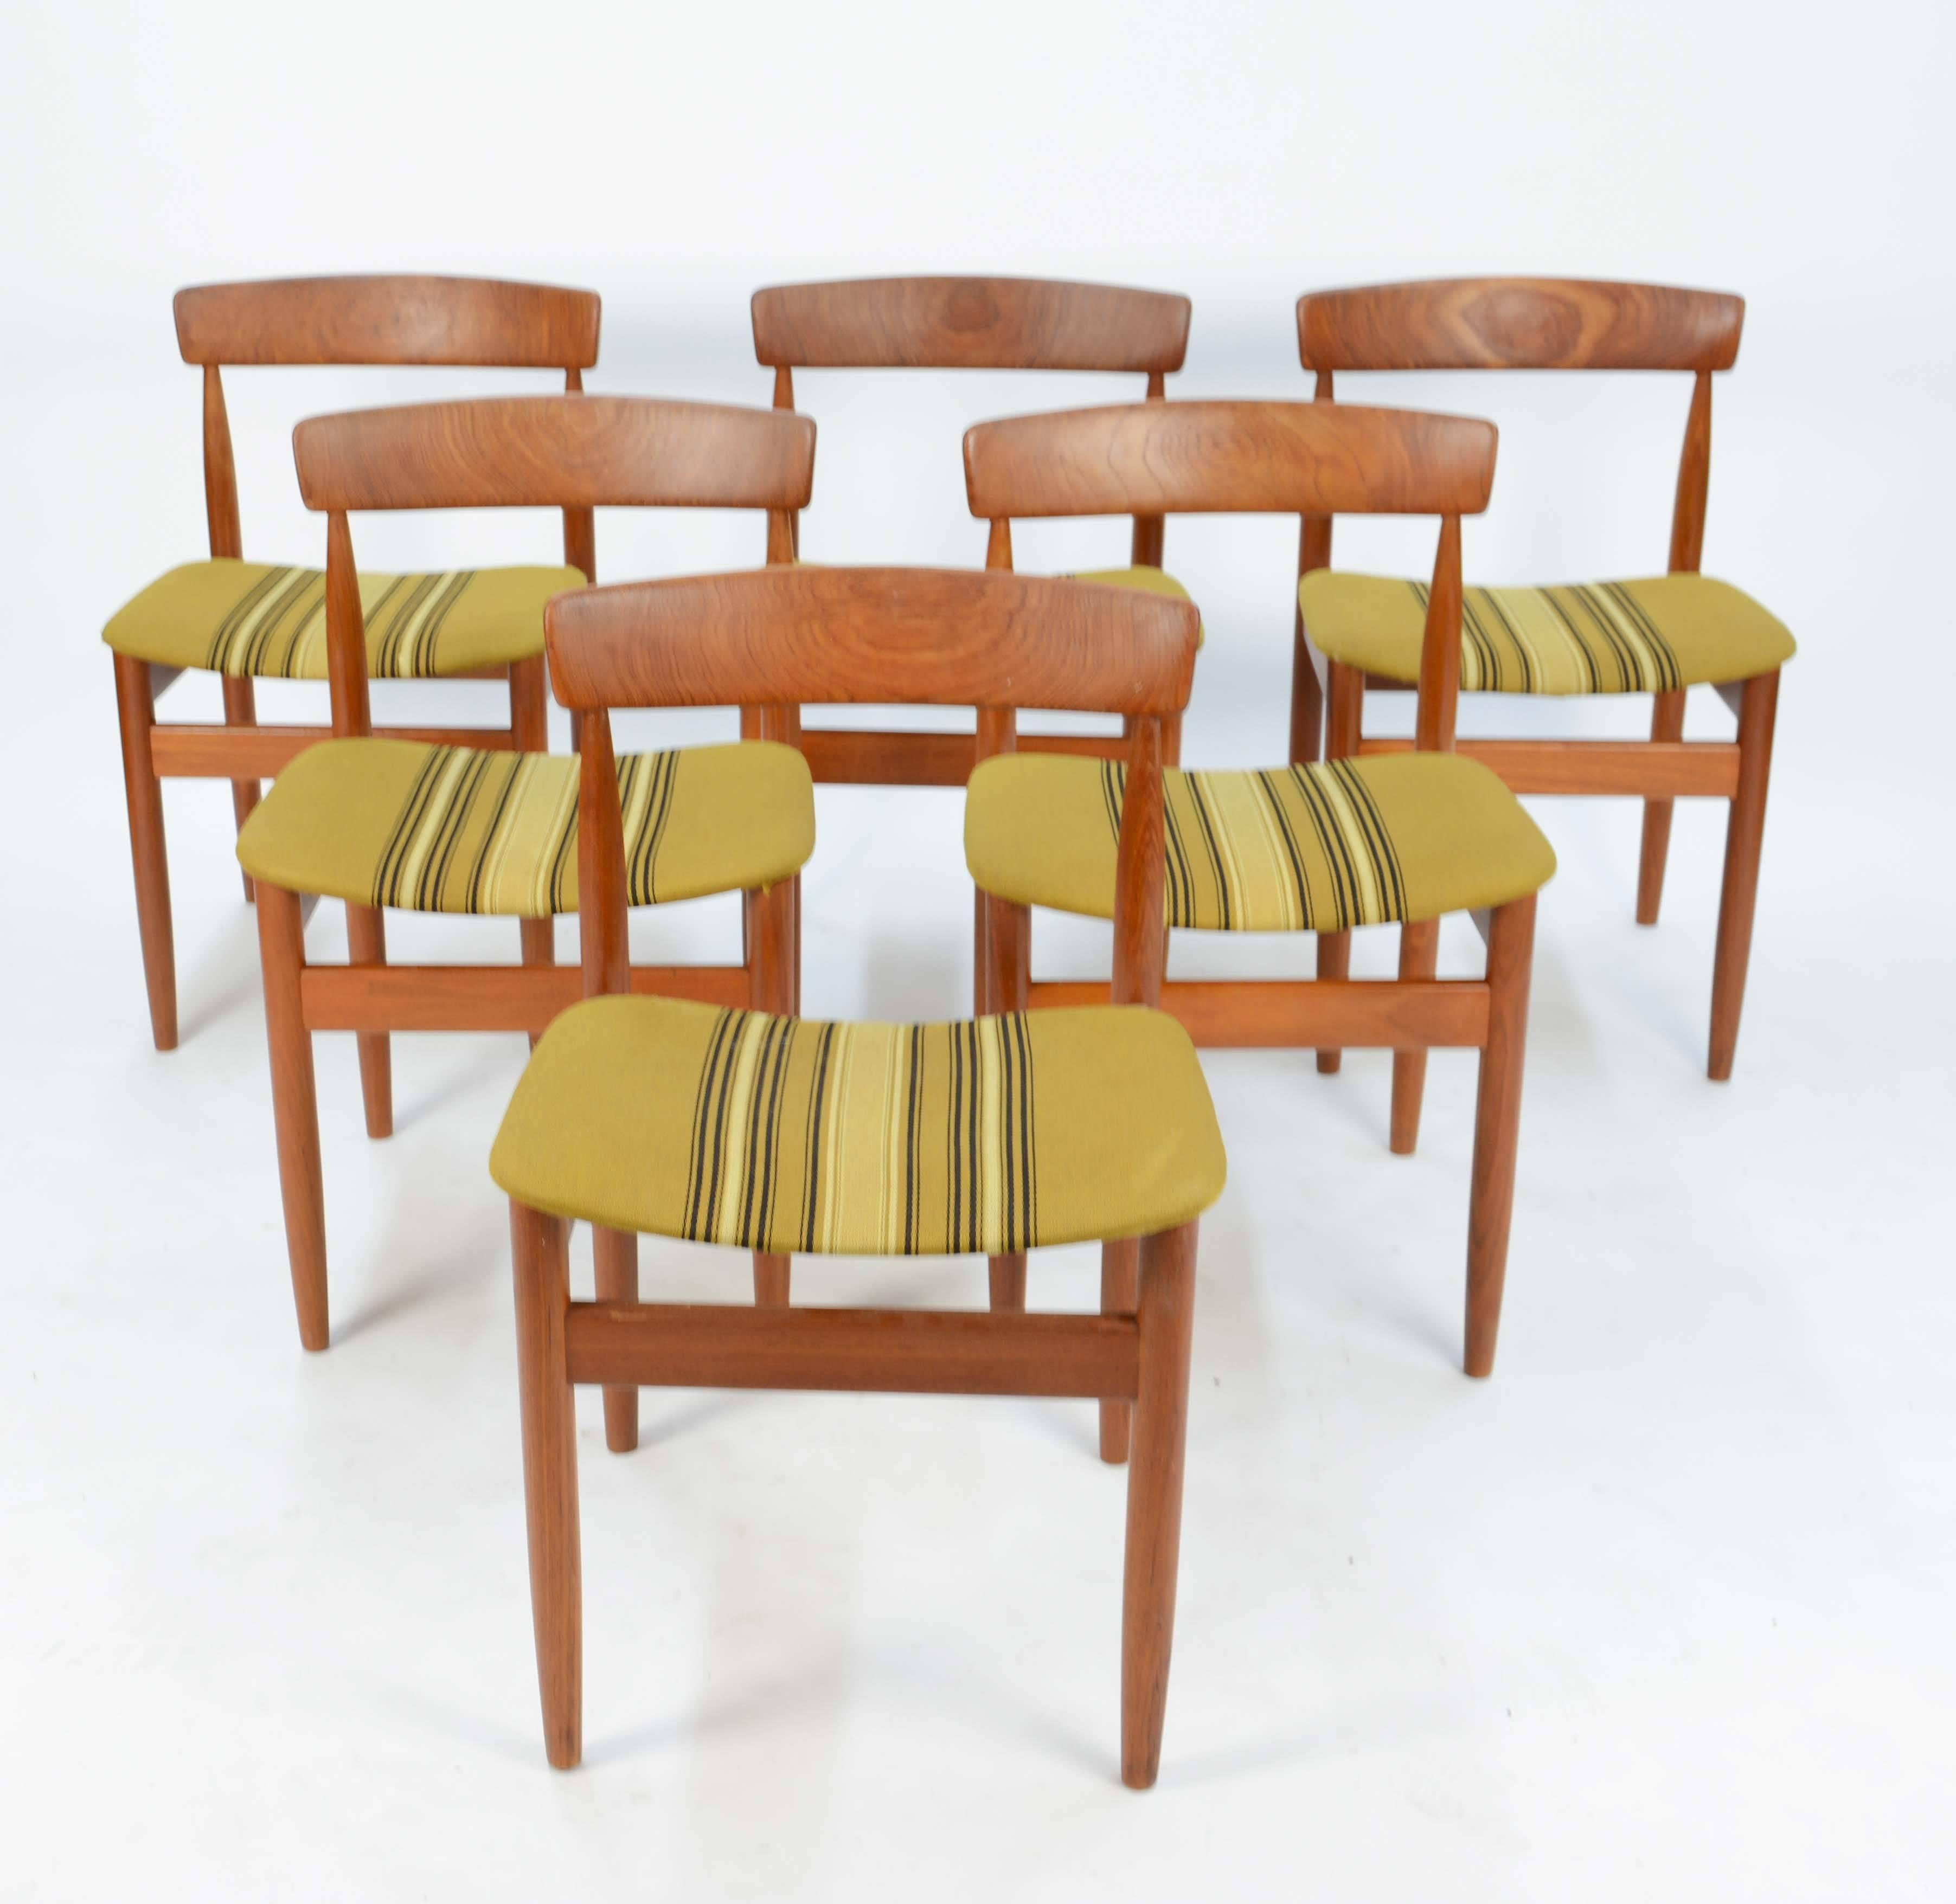 A set of six Hans Olsen teak dining chair with Danish stripped wool seats, 1966.